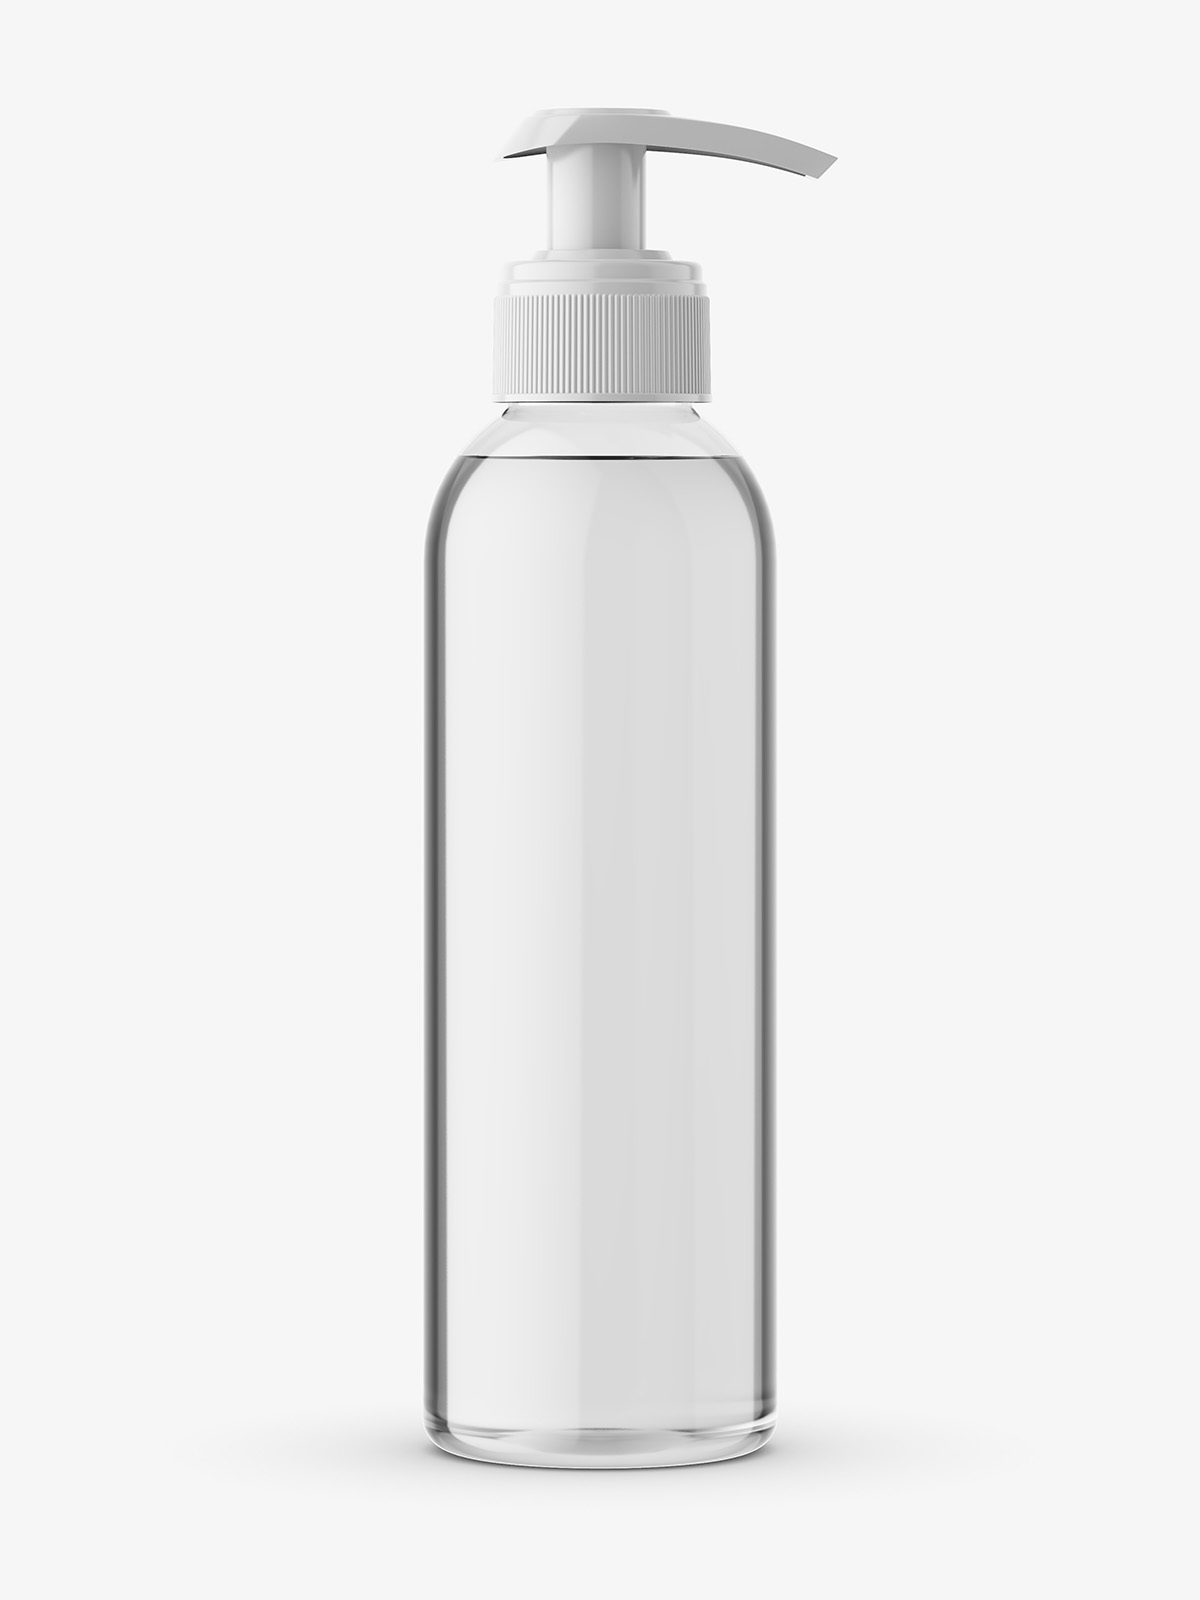 Download Transparent Cosmetic Bottle With Pump Mockup Smarty Mockups PSD Mockup Templates